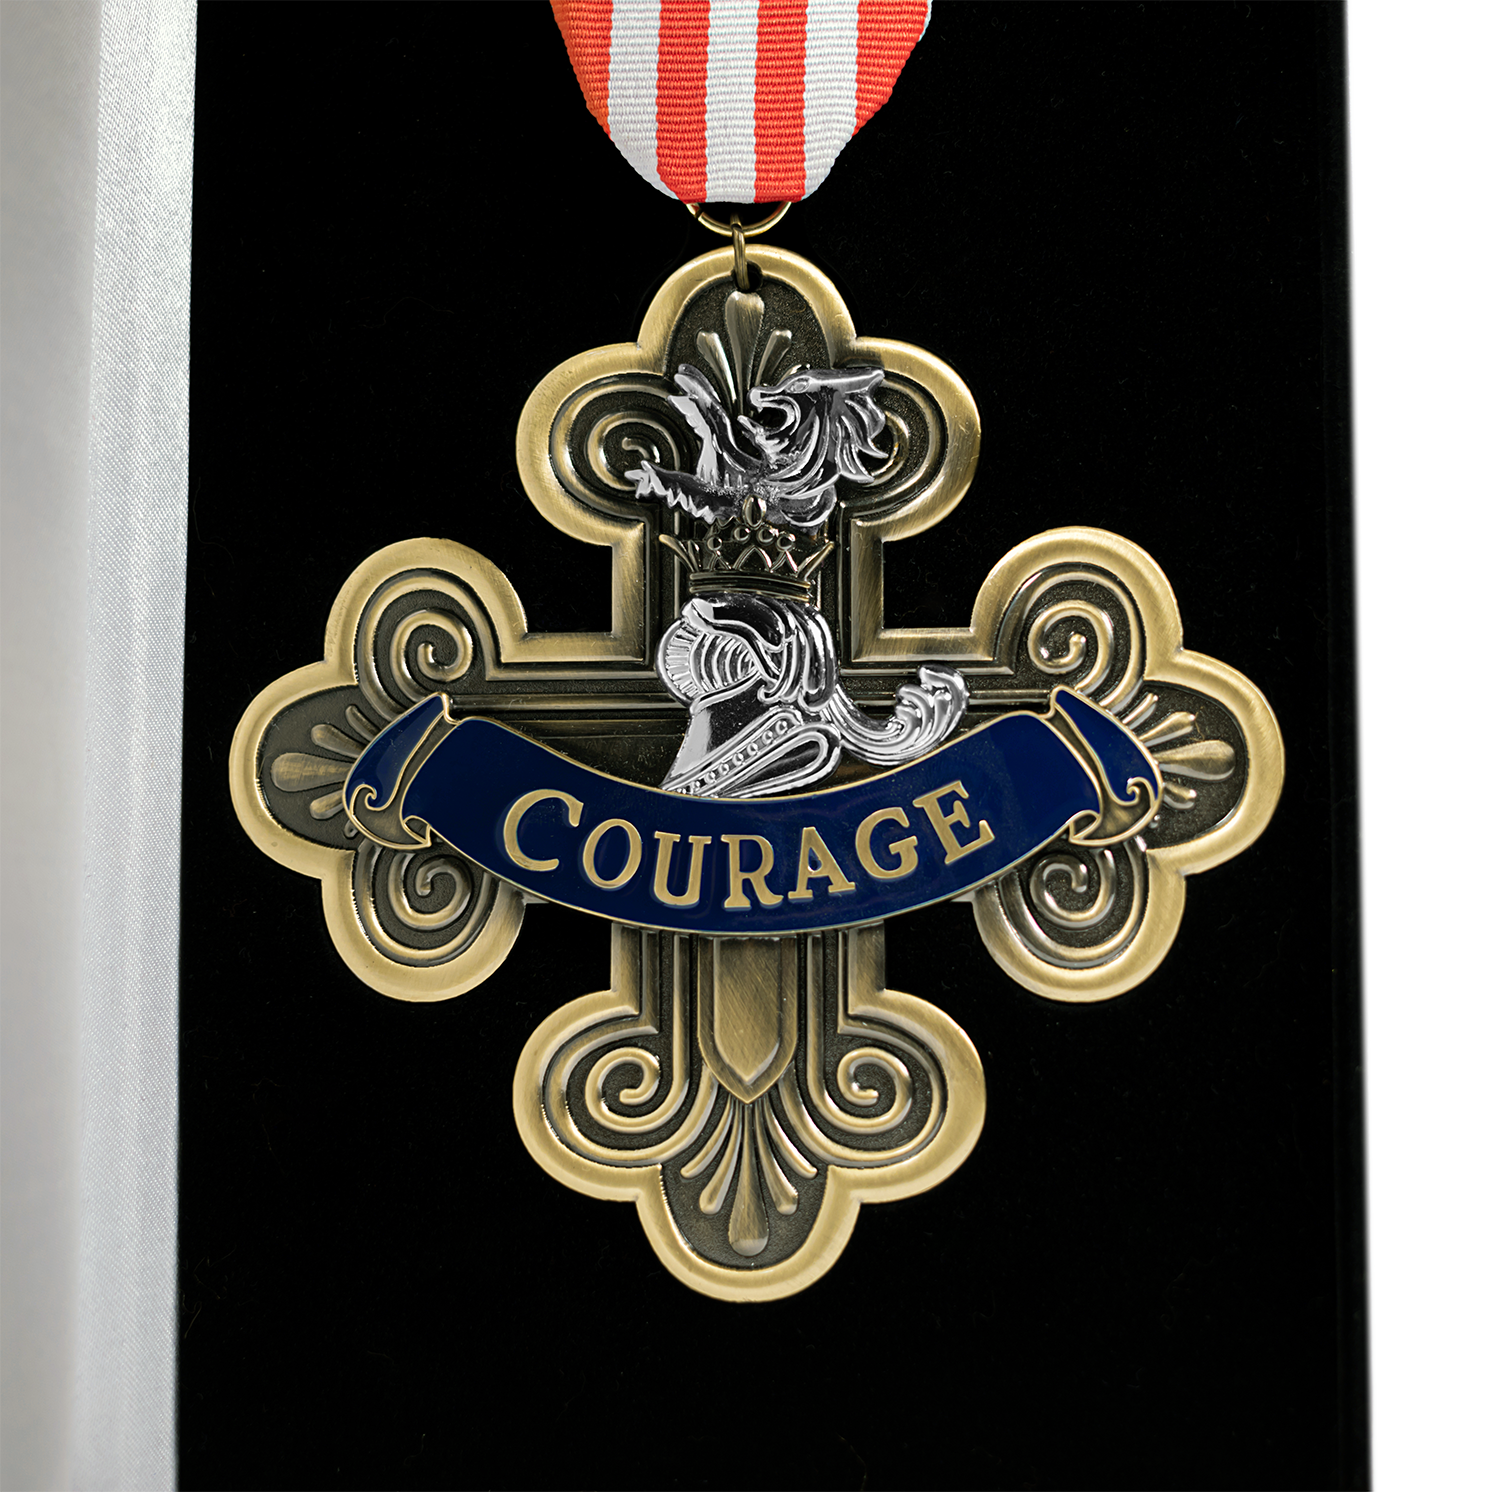 IKO1739-Wizard-of-Oz-Courage-Medal-Replica-007.png